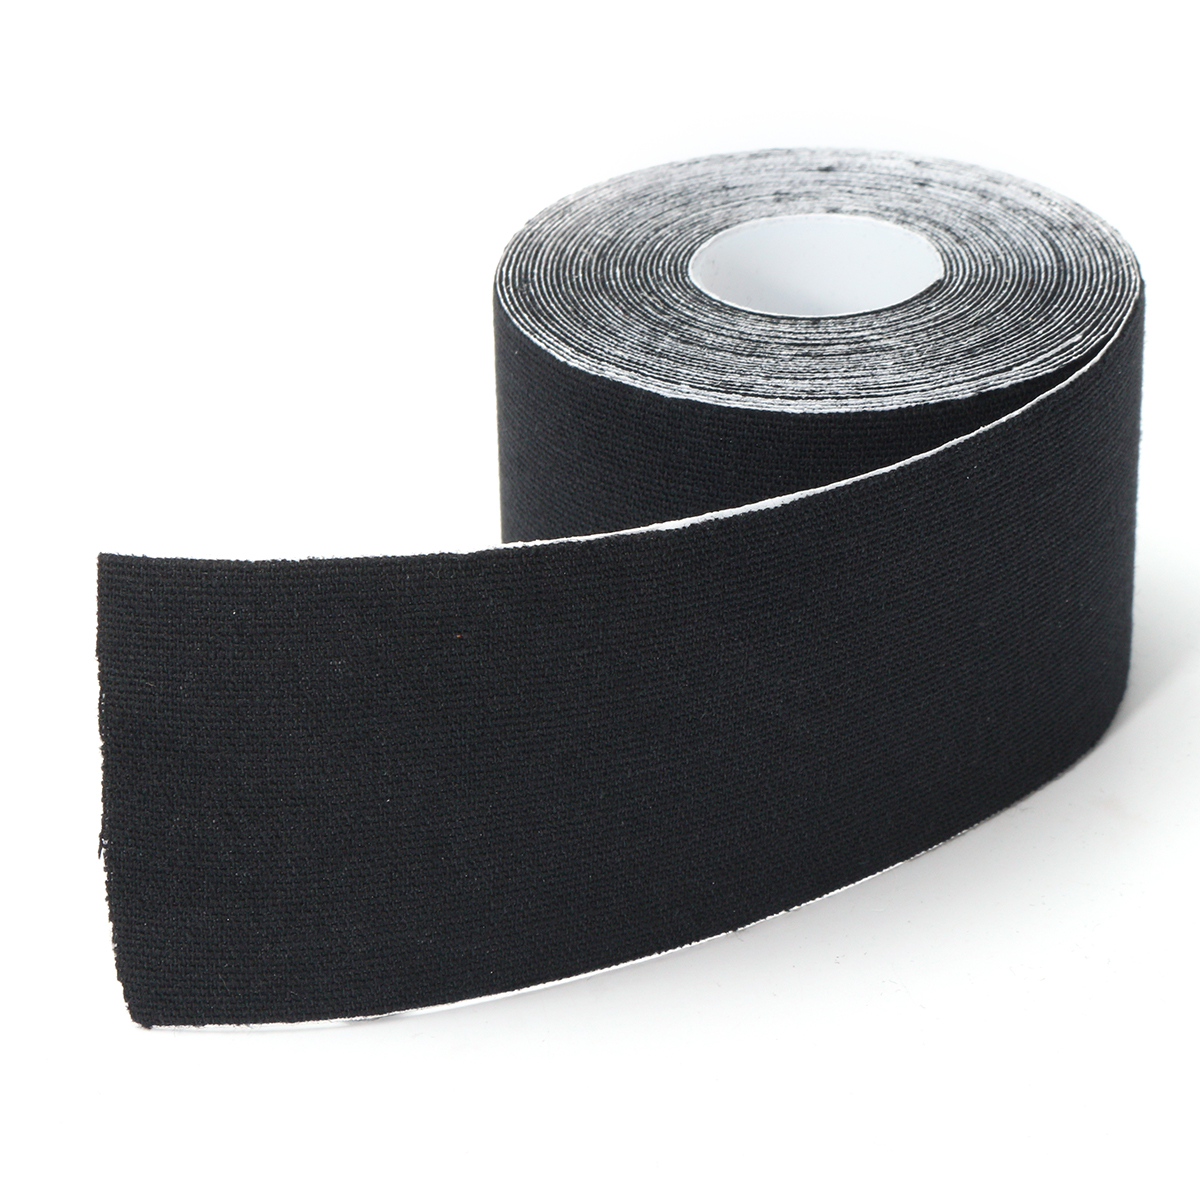 5-Rolls-5m5cm-Self-adhesive-Muscle-Strain-Sport-Support-Tape-Physio-Therapeutic-1123771